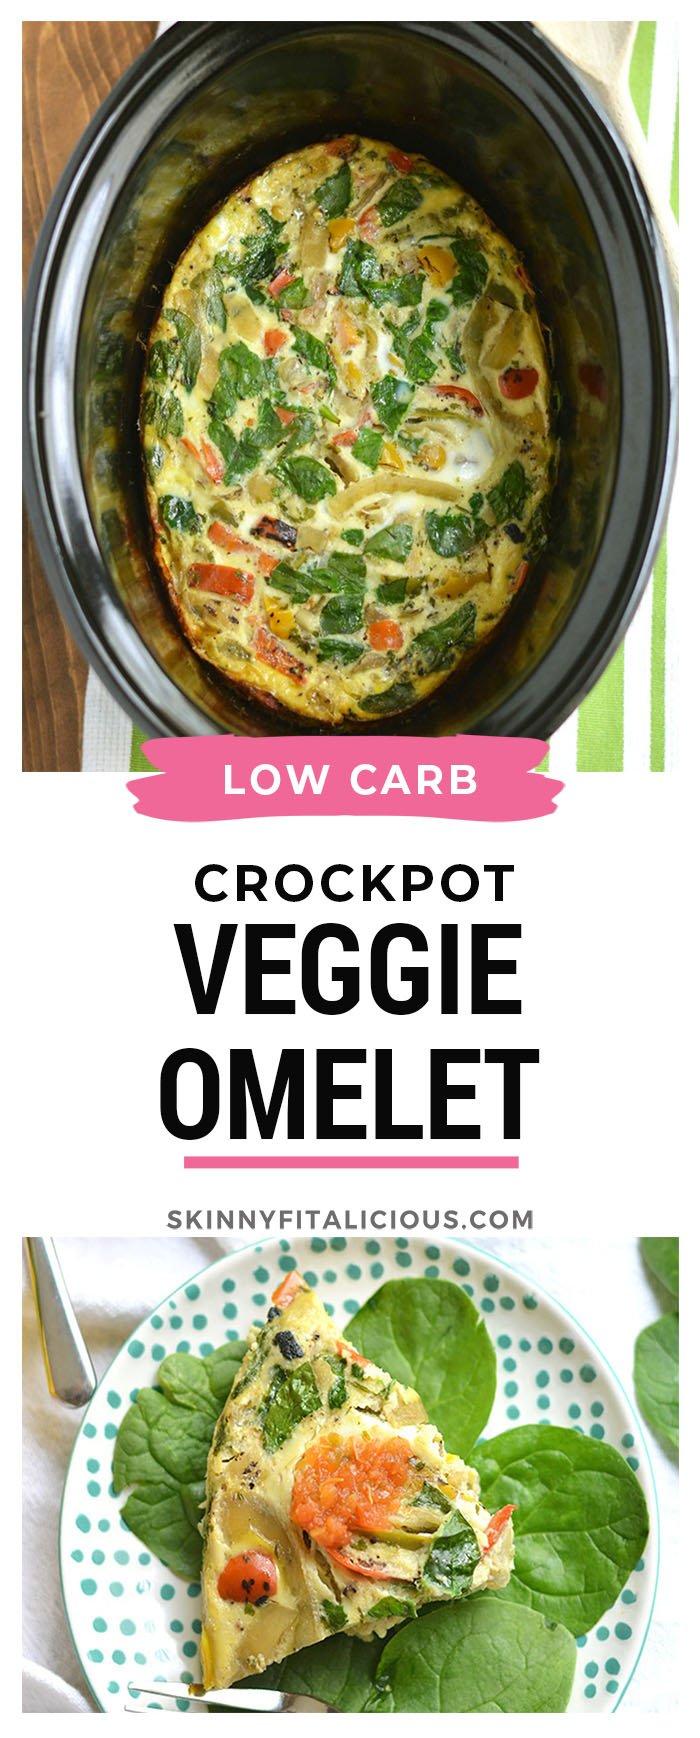 Crockpot Veggie Omelet! Make breakfast easy by letting the slow cooker do the work! This simple make ahead breakfast is loaded with vegetables and protein. The perfect way to start the day. Paleo + Gluten Free + Low Calorie!